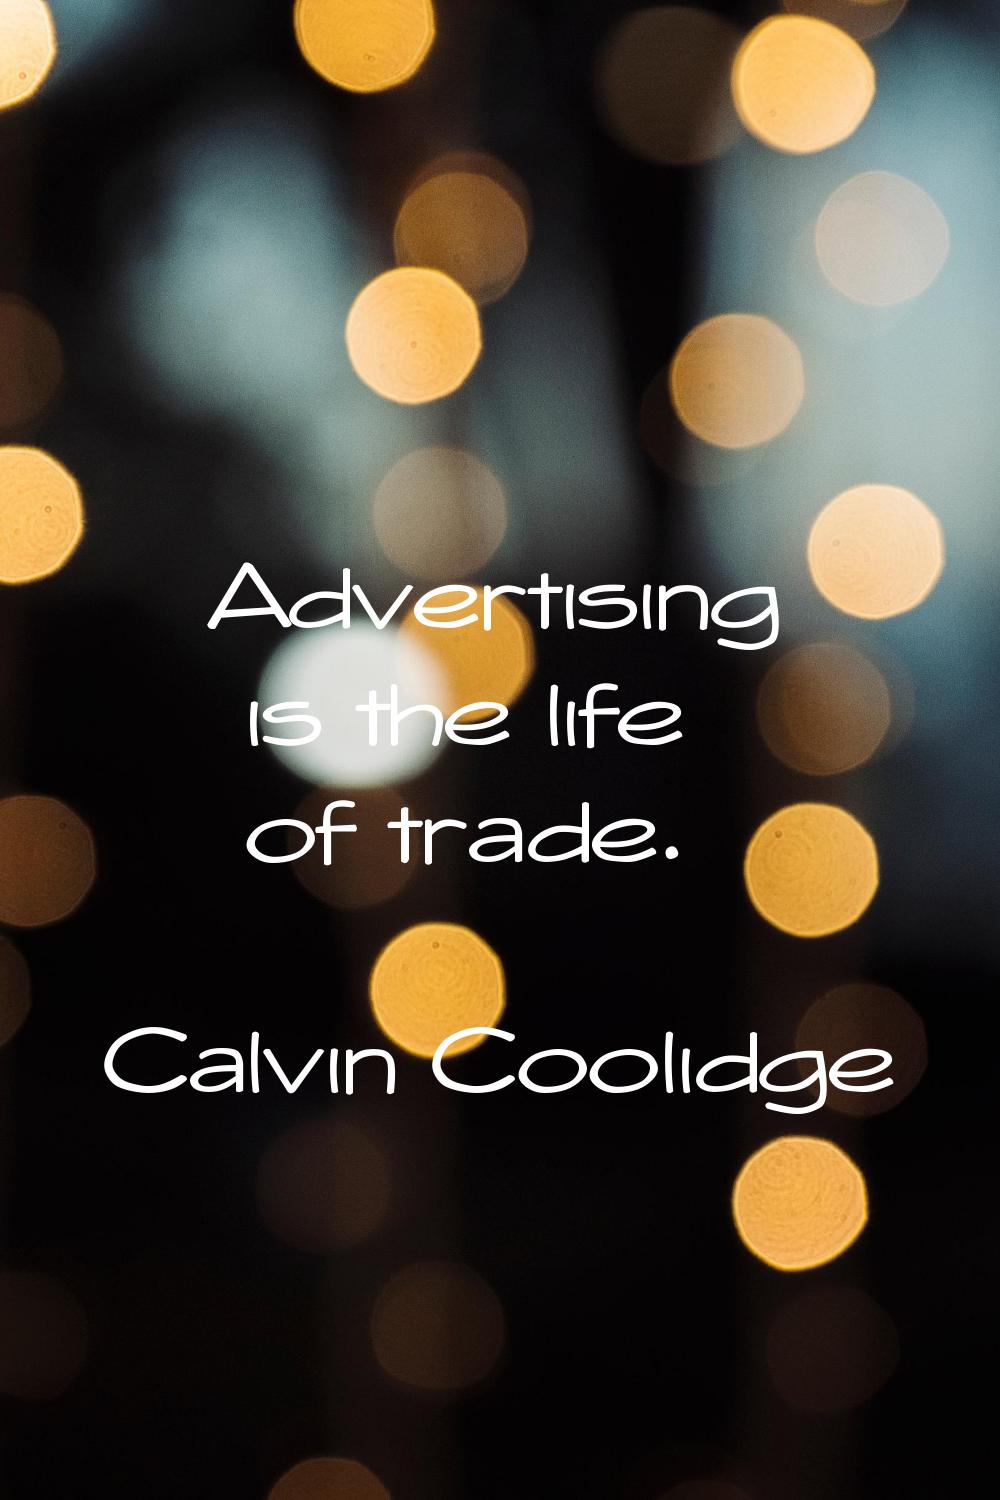 Advertising is the life of trade.